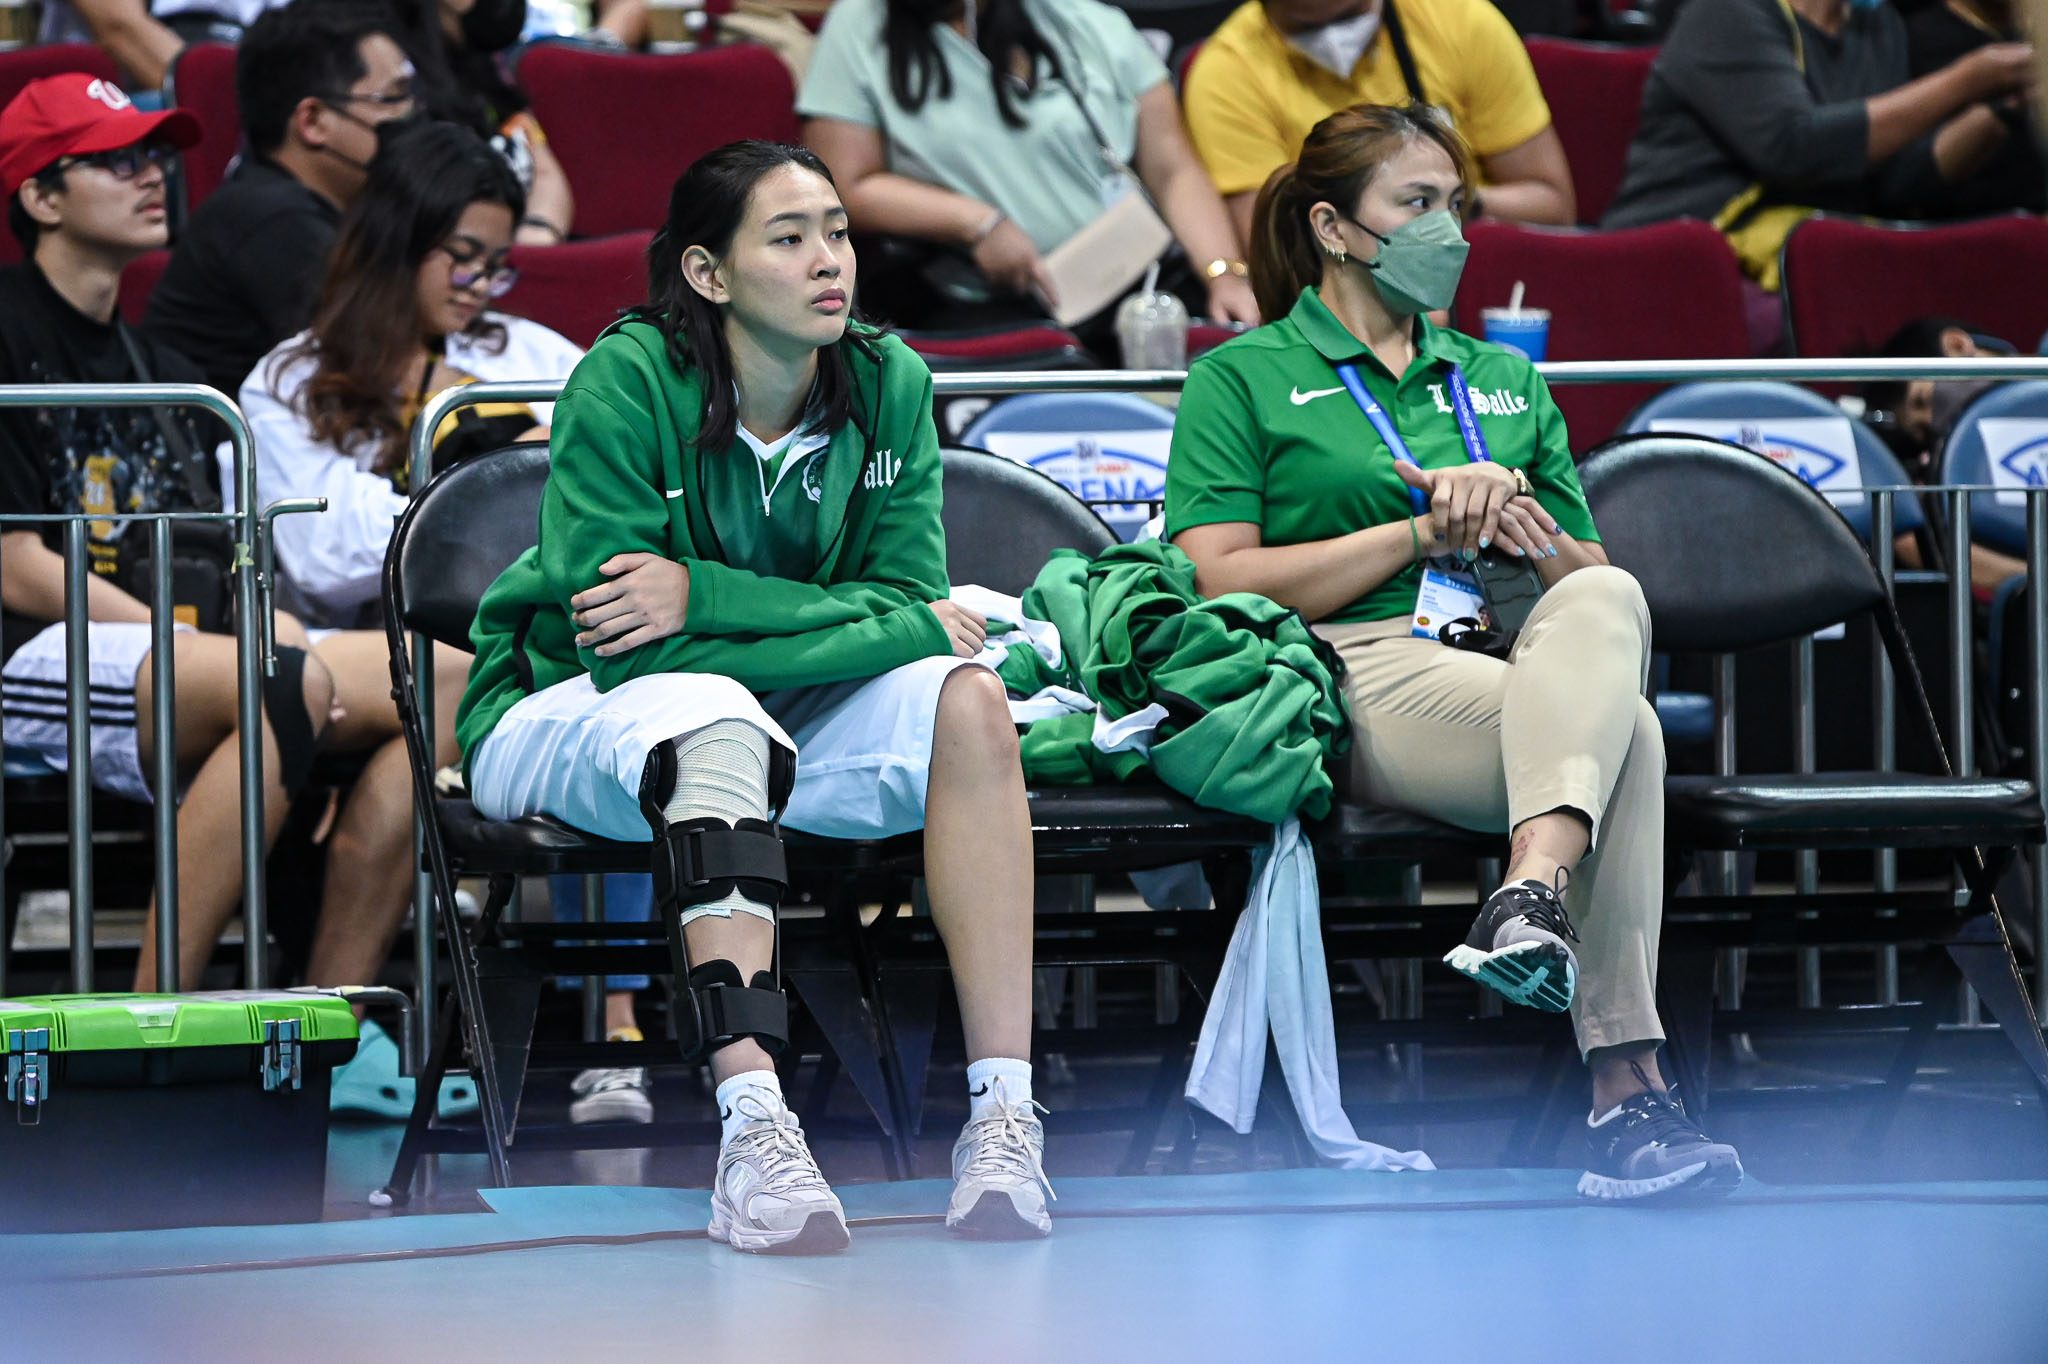 La Salle rallies around injured Leila Cruz as long road to ACL recovery starts